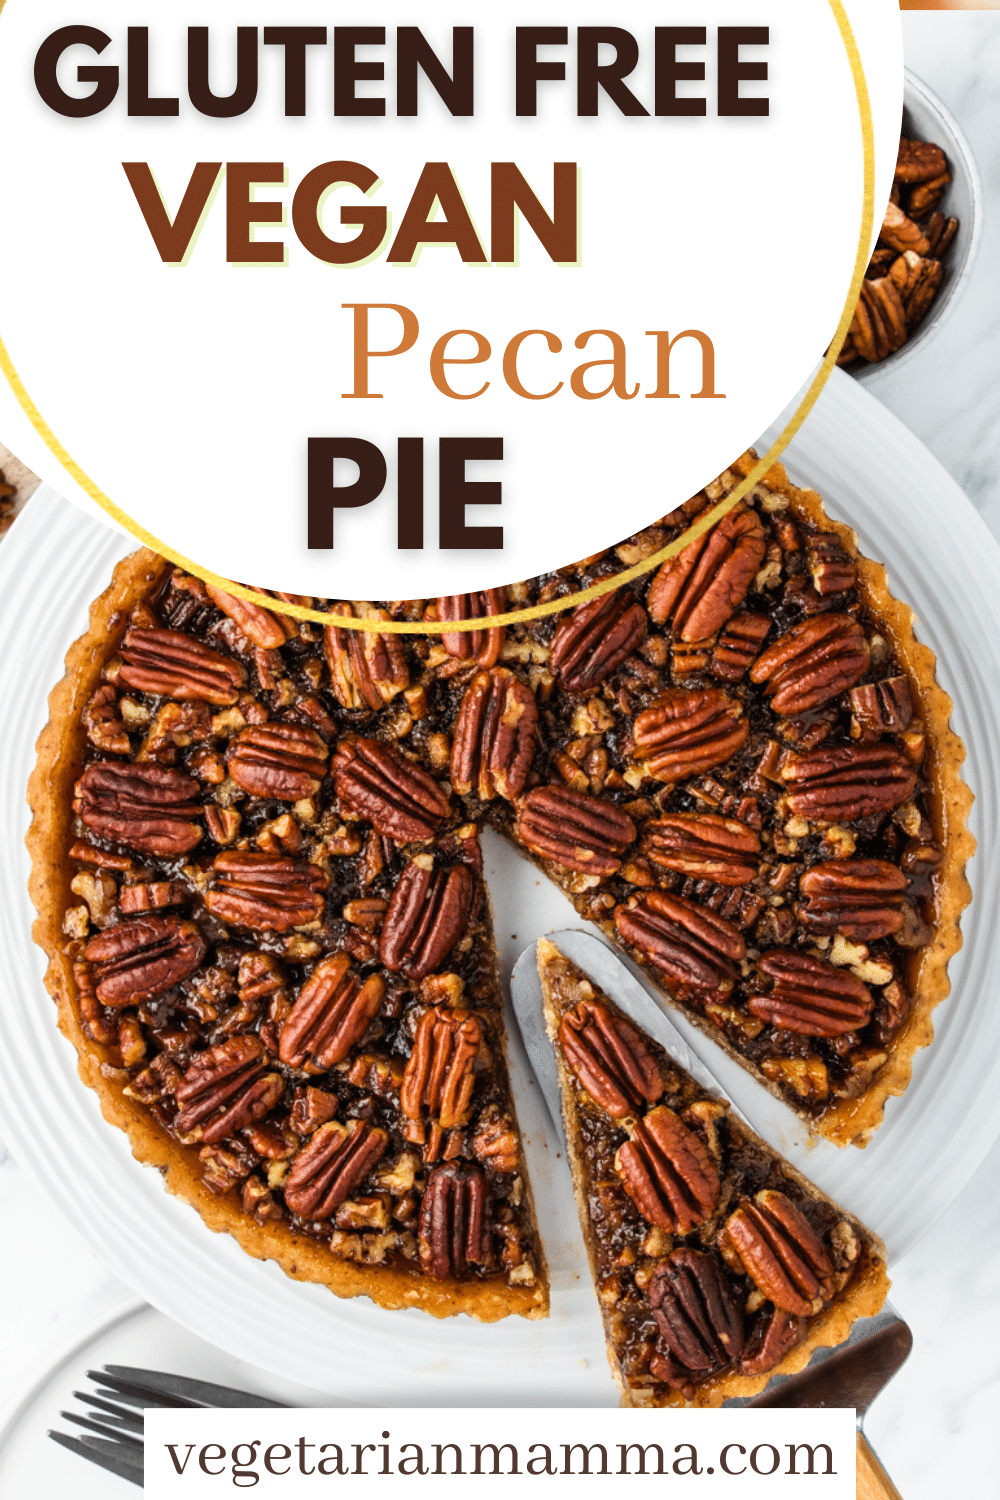 This Vegan Pecan Pie is so sugary and rich, no one will believe it's dairy and egg free! This recipe also has no cornstarch and uses a homemade gluten-free crust.